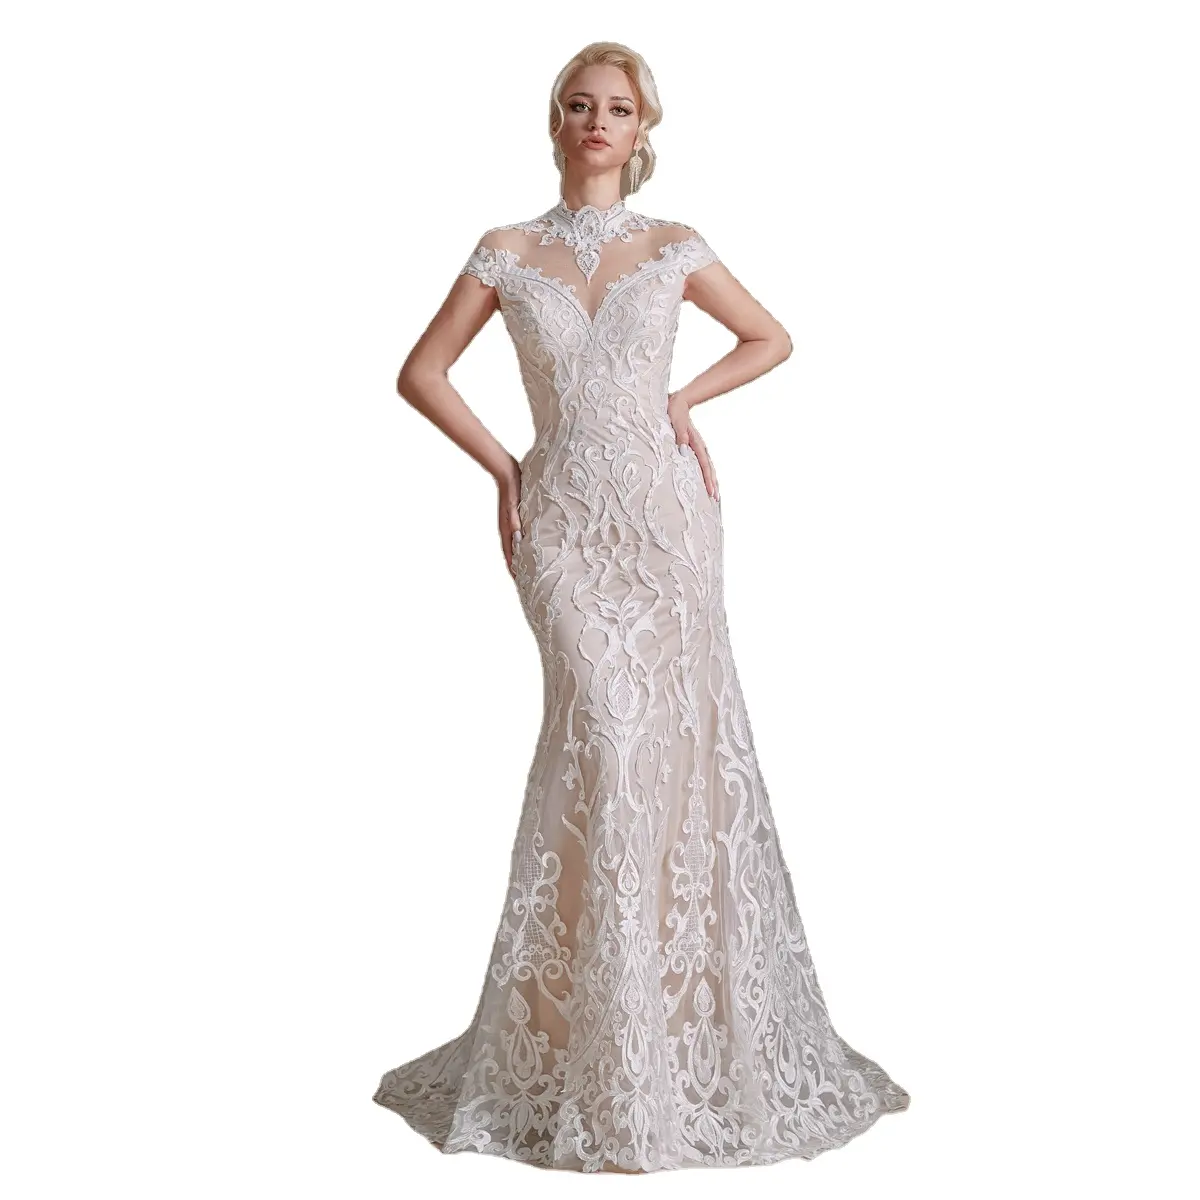 2022 New Style Collar Cap Sleeve Fit and Flare Champagne Lace Women Wedding Dresses for Brides at Wholesale Price